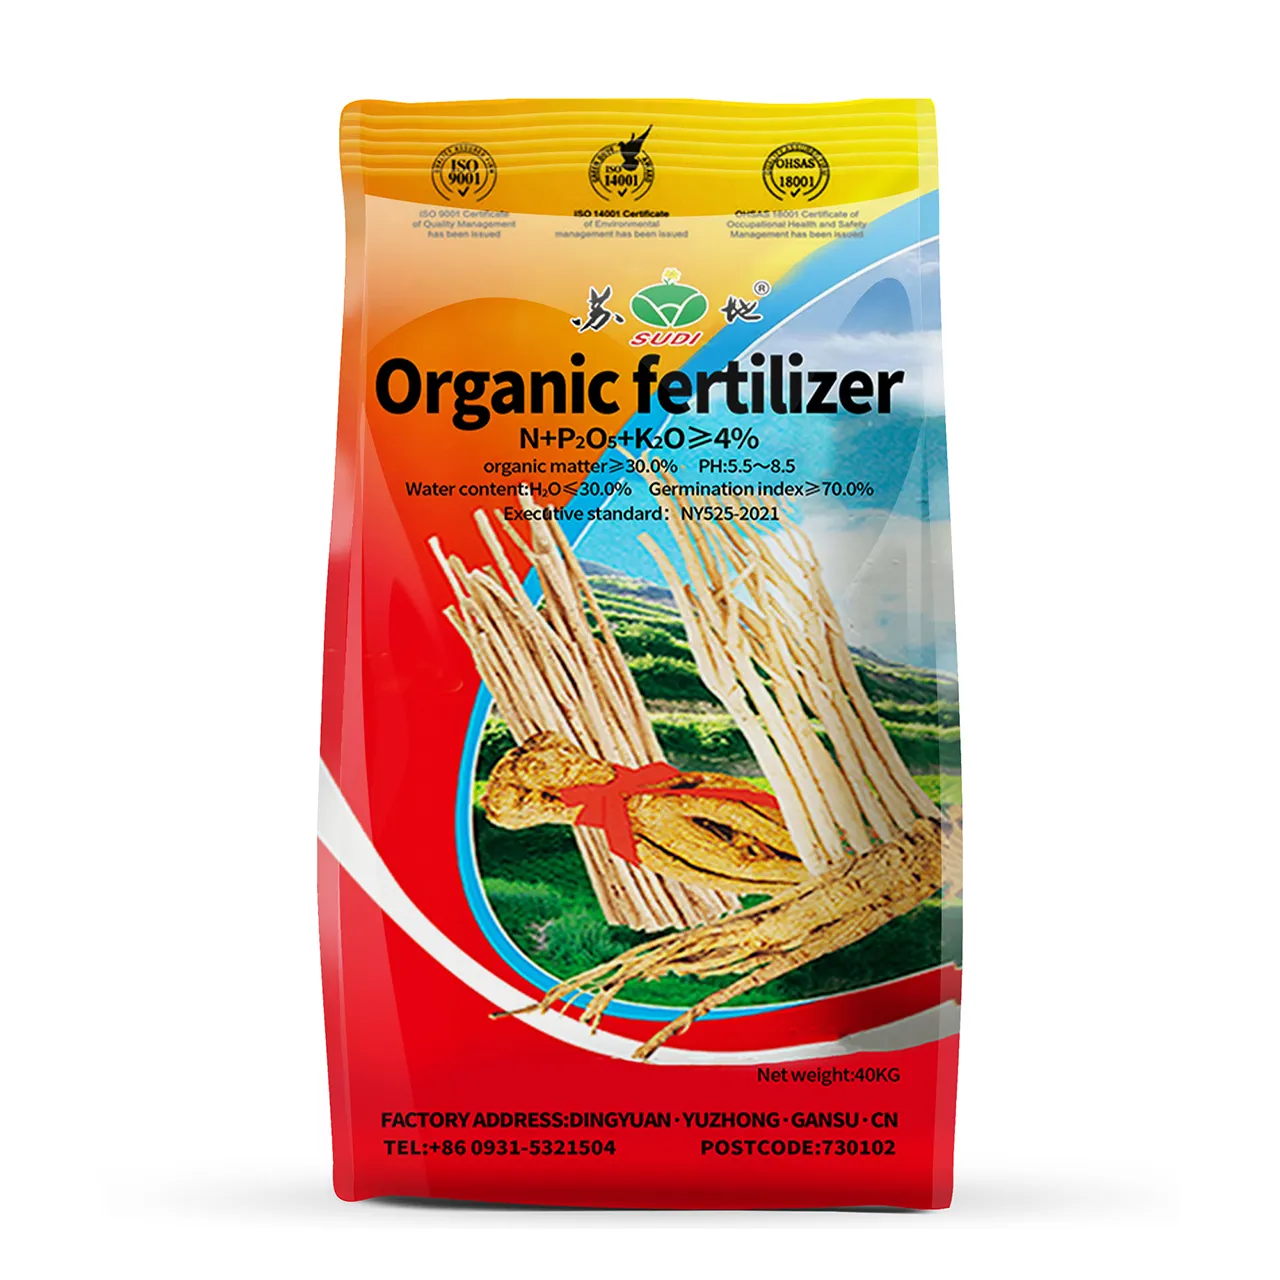 4%NPK organic matter30.0% Specialized for medicinal herbs Granular and prilled and powder organic fertilizer